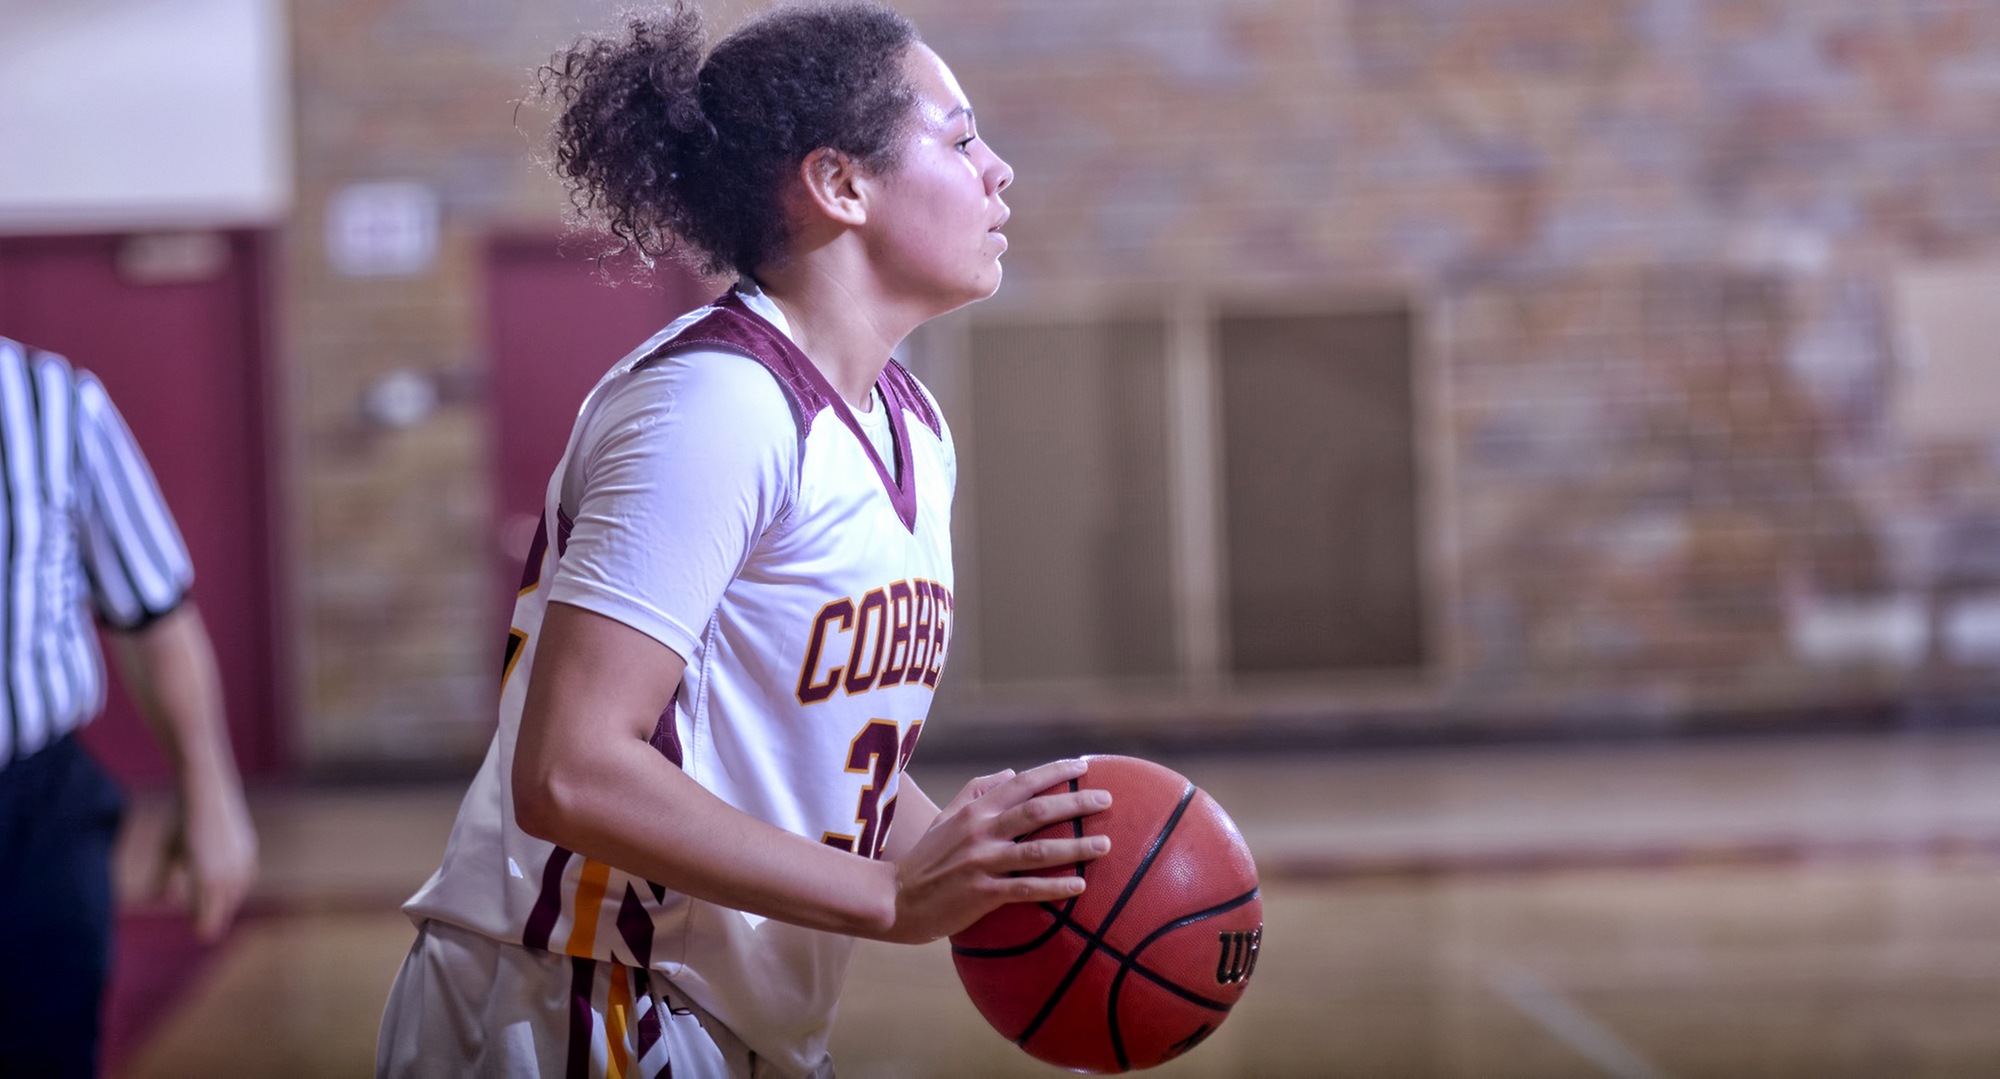 Sophomore Aleya Parker looks to make an entry pass during the second half of the Cobbers' win against Macalester. She finished with a career-high 16 points.